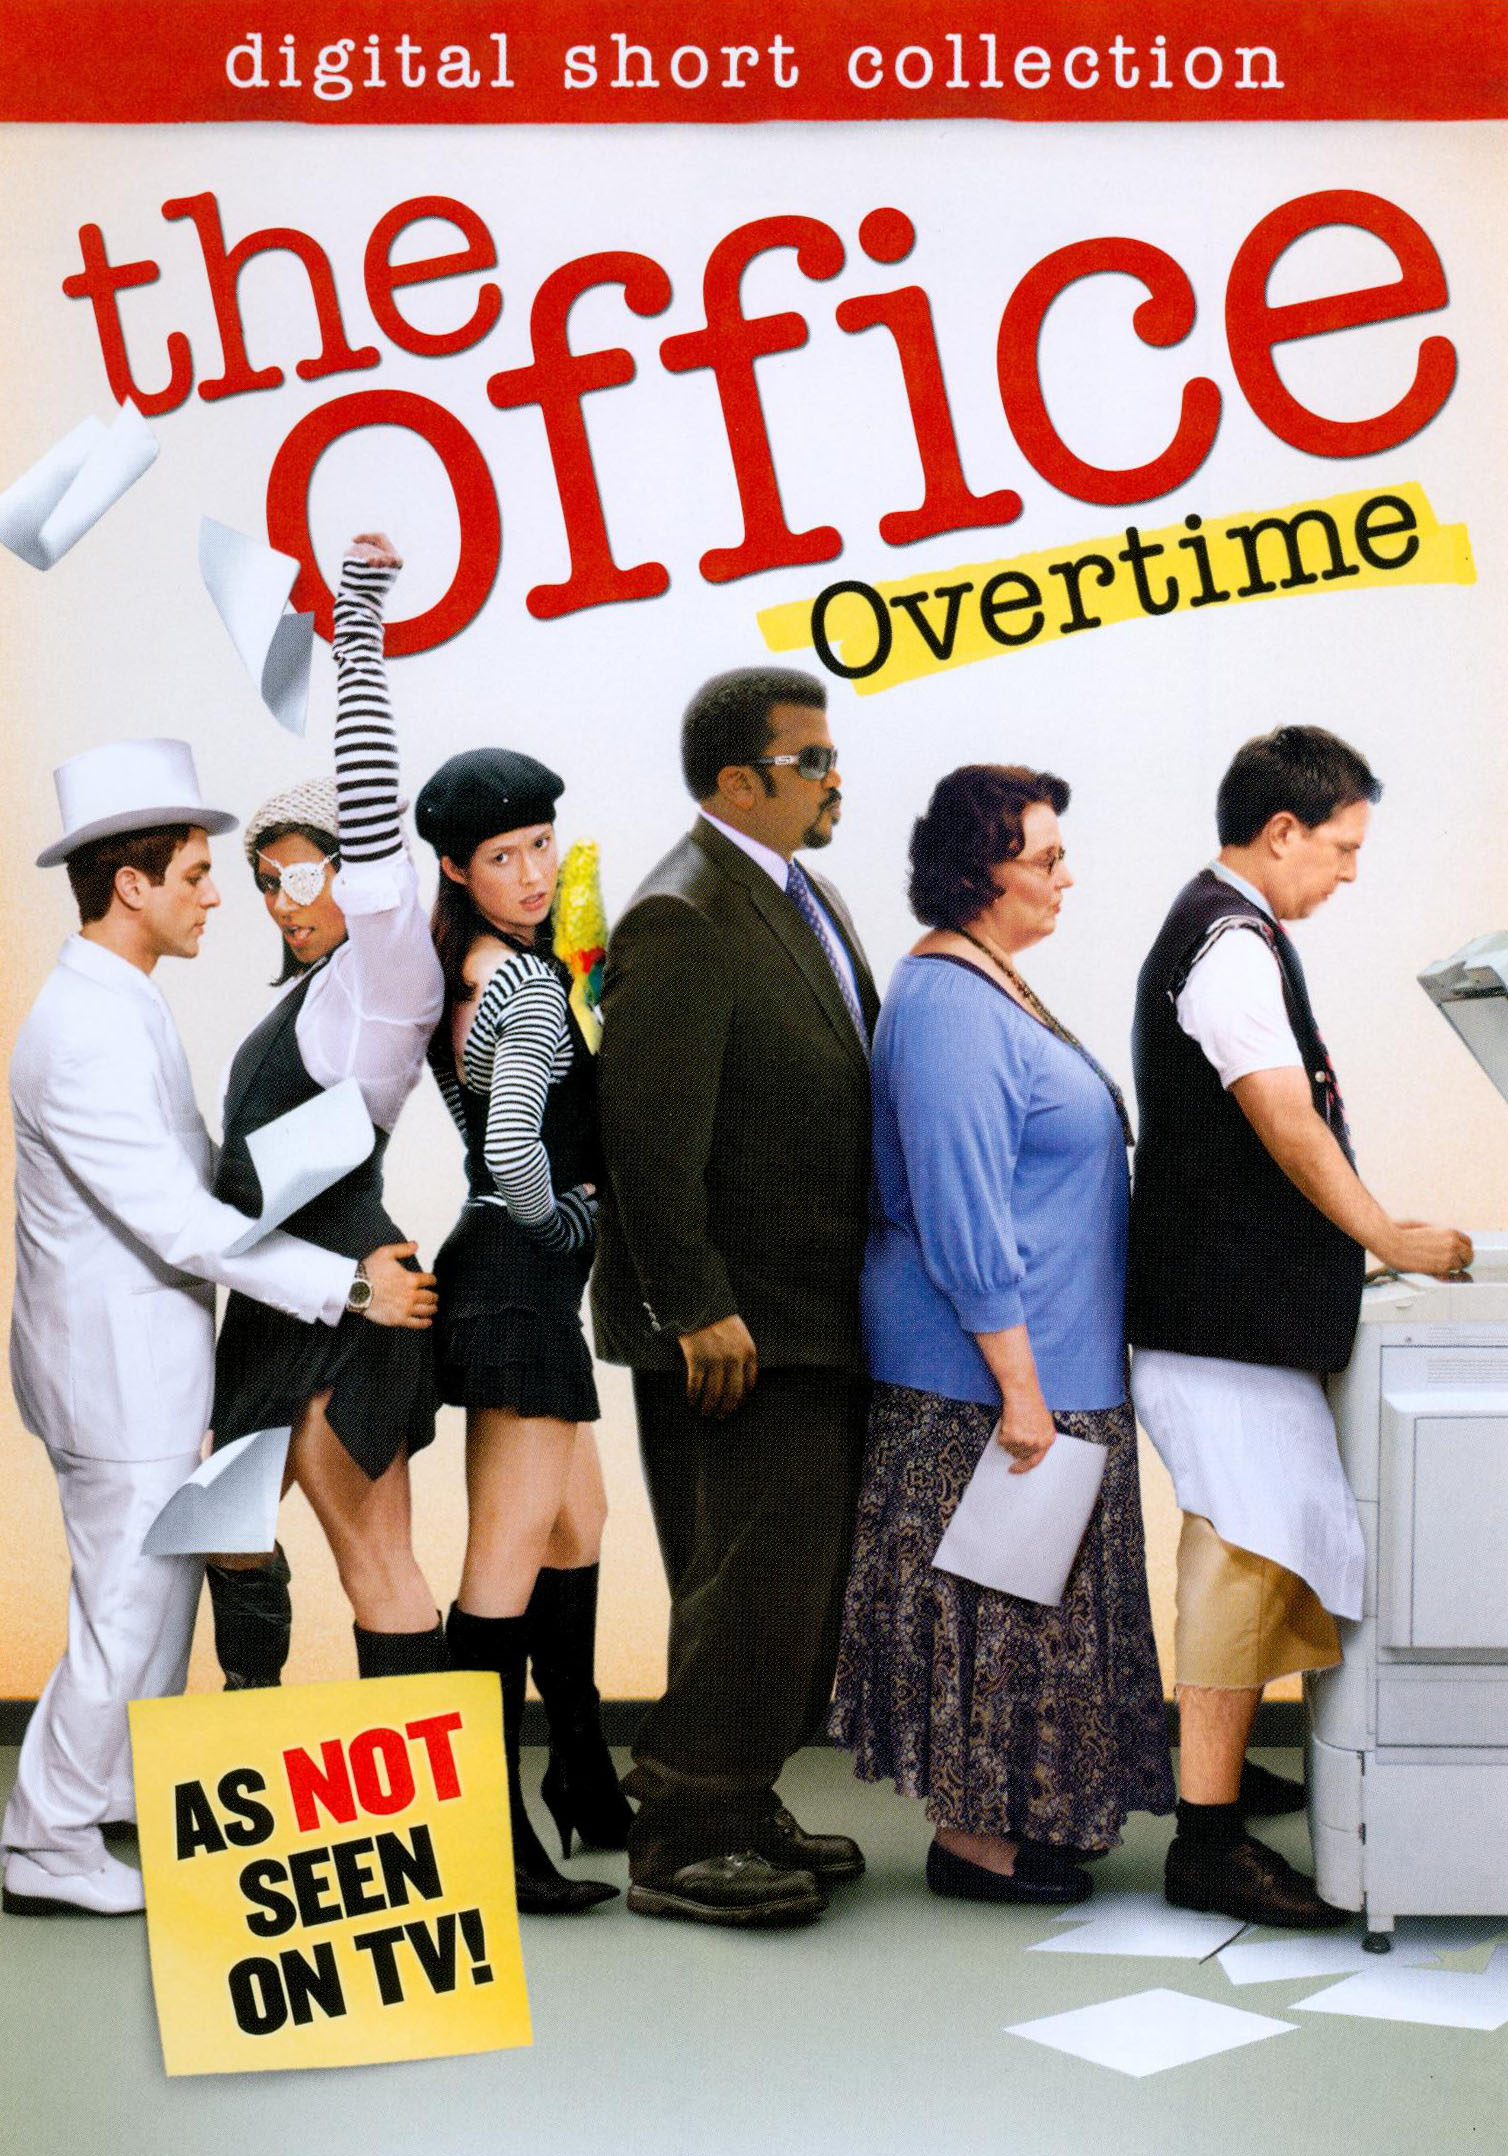 Best Buy: The Office: Overtime Digital Shorts Collection [DVD]